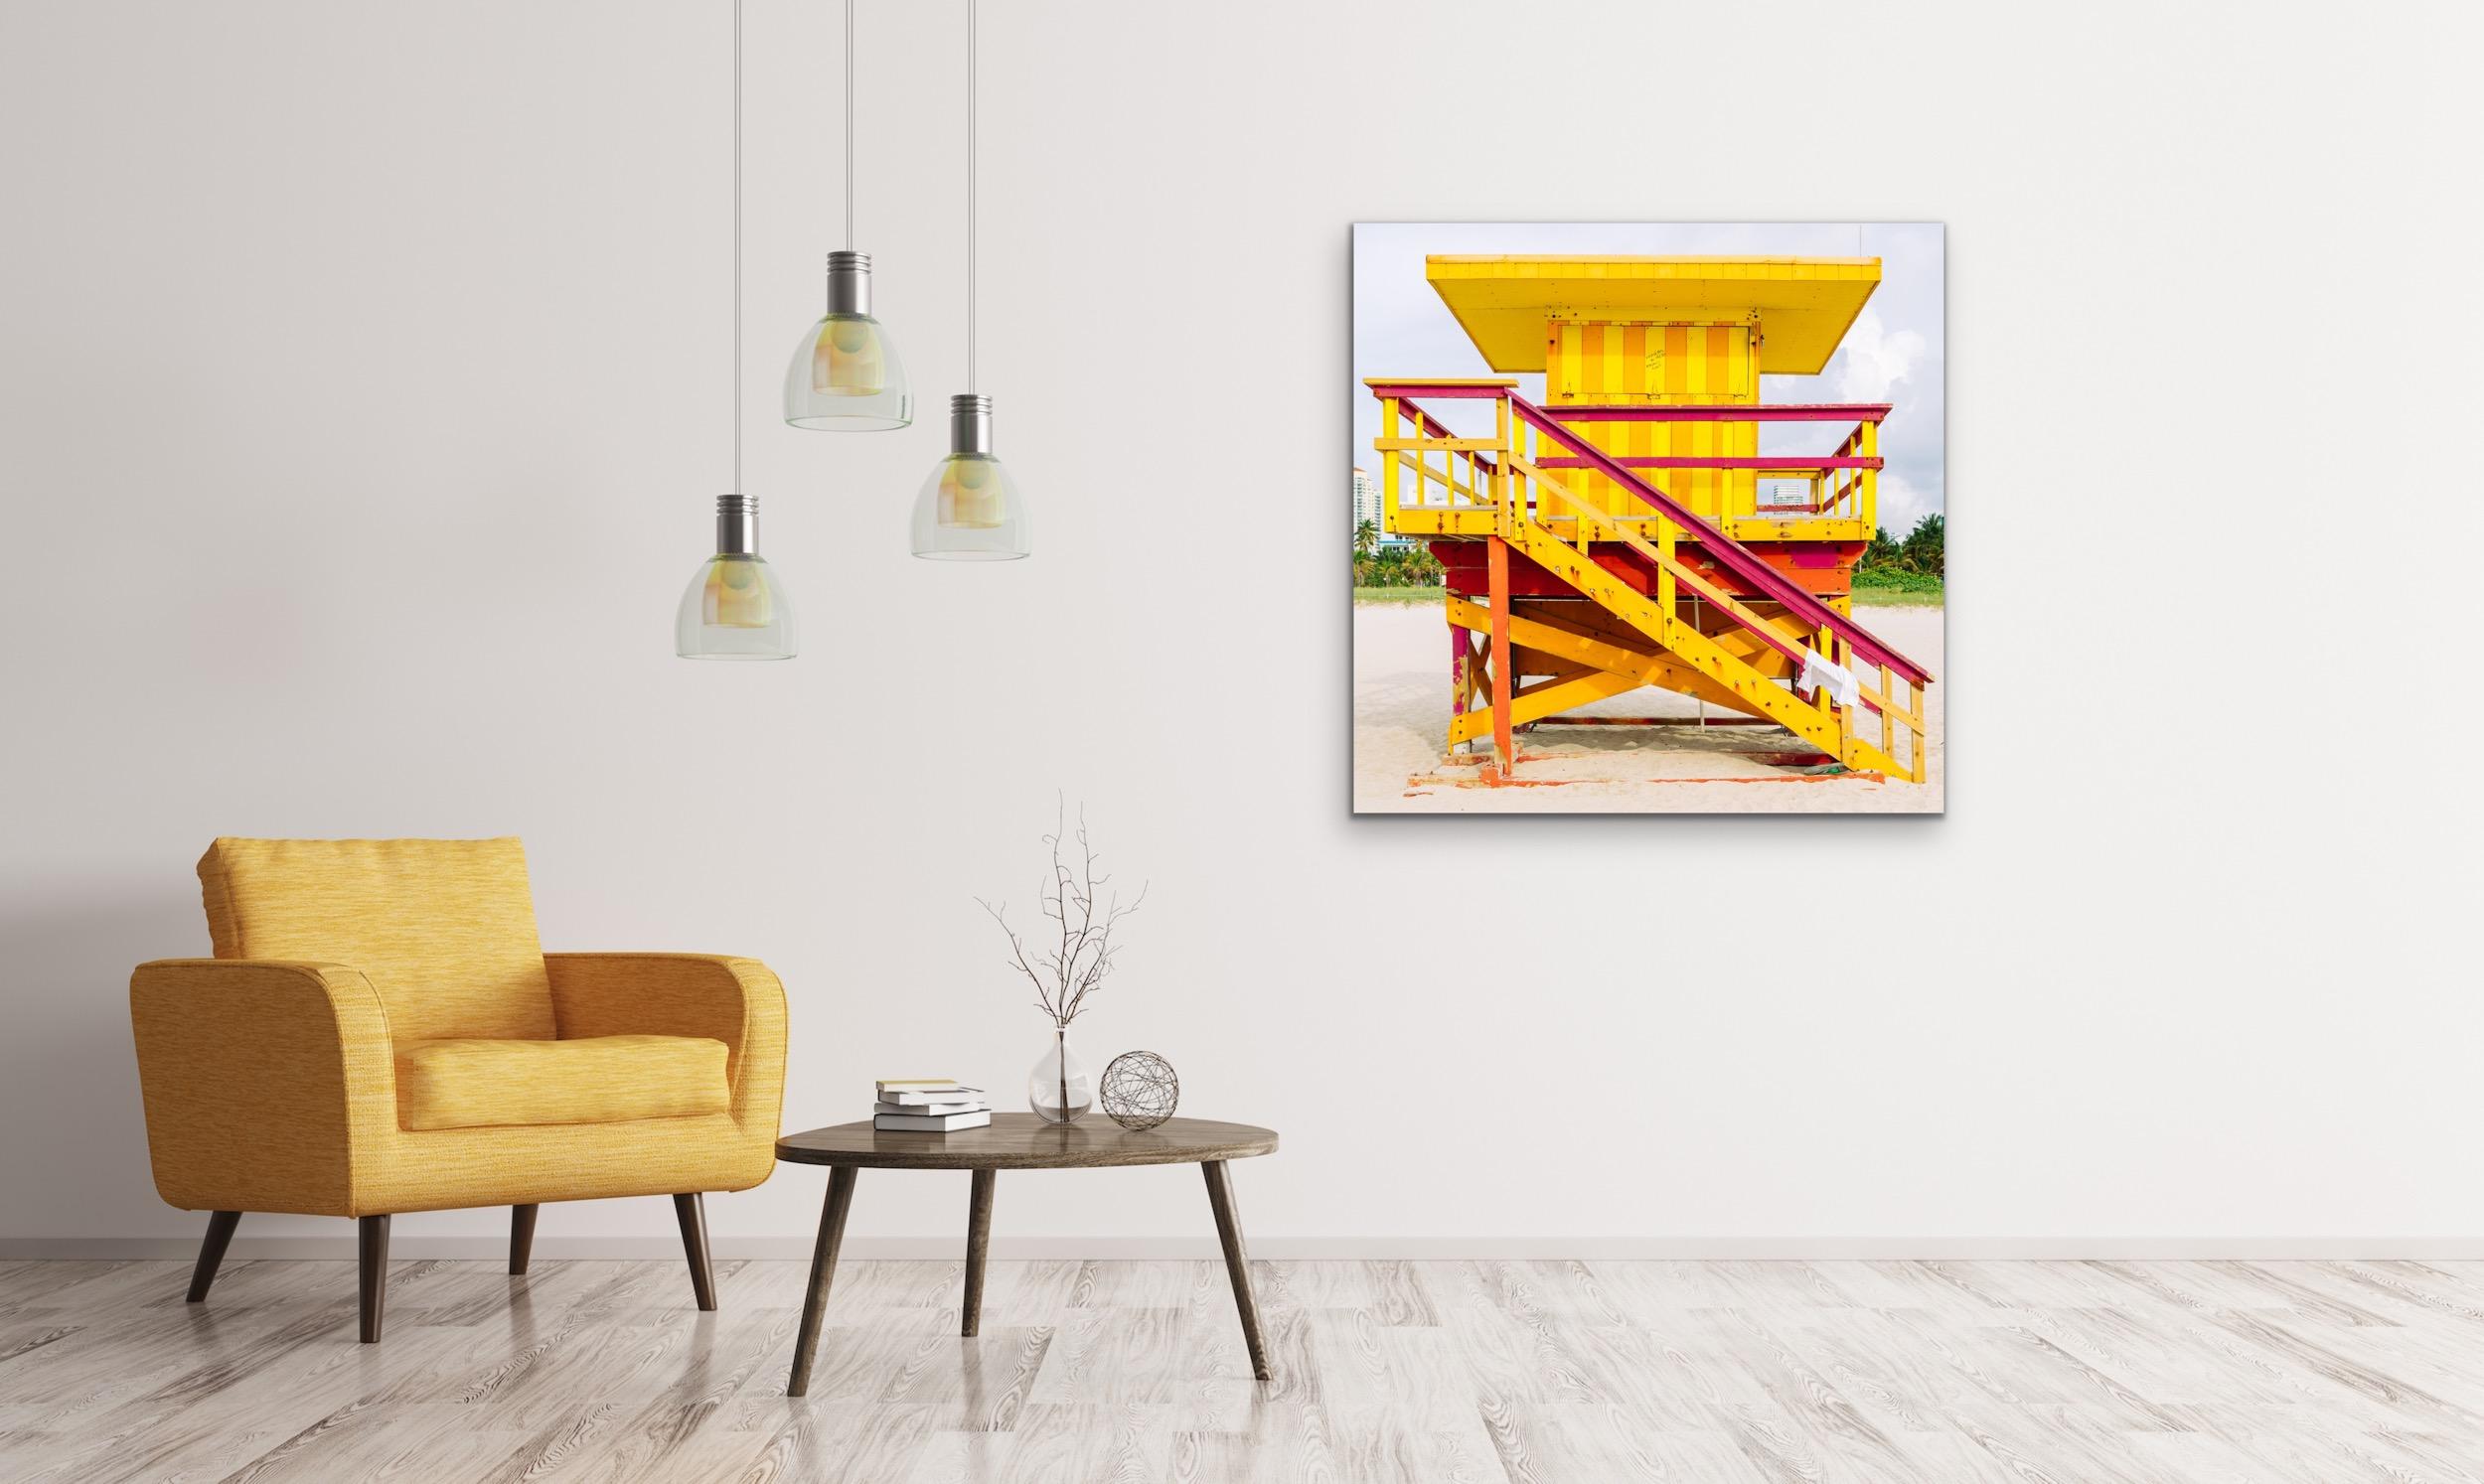 This contemporary coastal photograph by Peter Mendelson depicts a bright yellow, orange, and red lifeguard stand on Miami Beach in Florida. The structure features a yellow staircase with red railing that leads up to a landing where yellow and orange